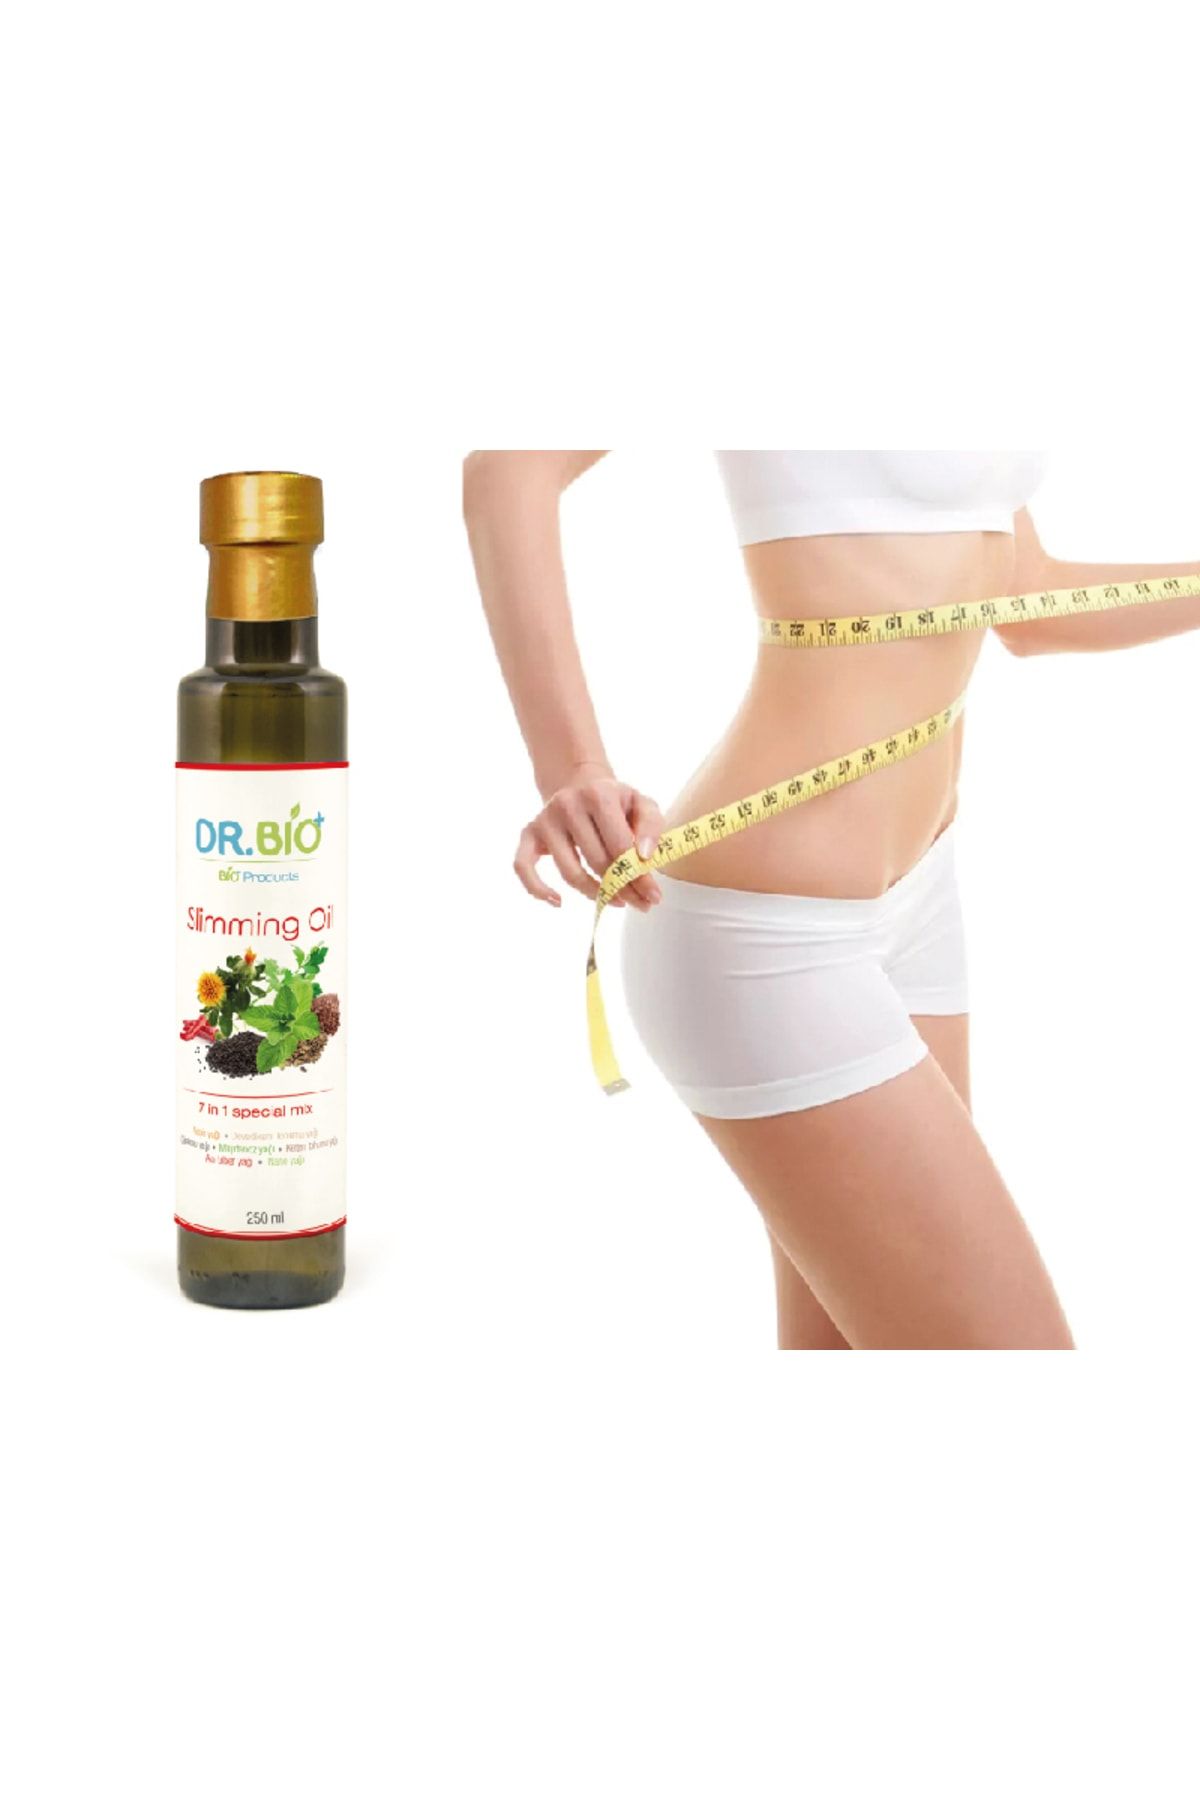 DR BİO Slimming Oil ( 7 In 1 Special Mix ) 250ml